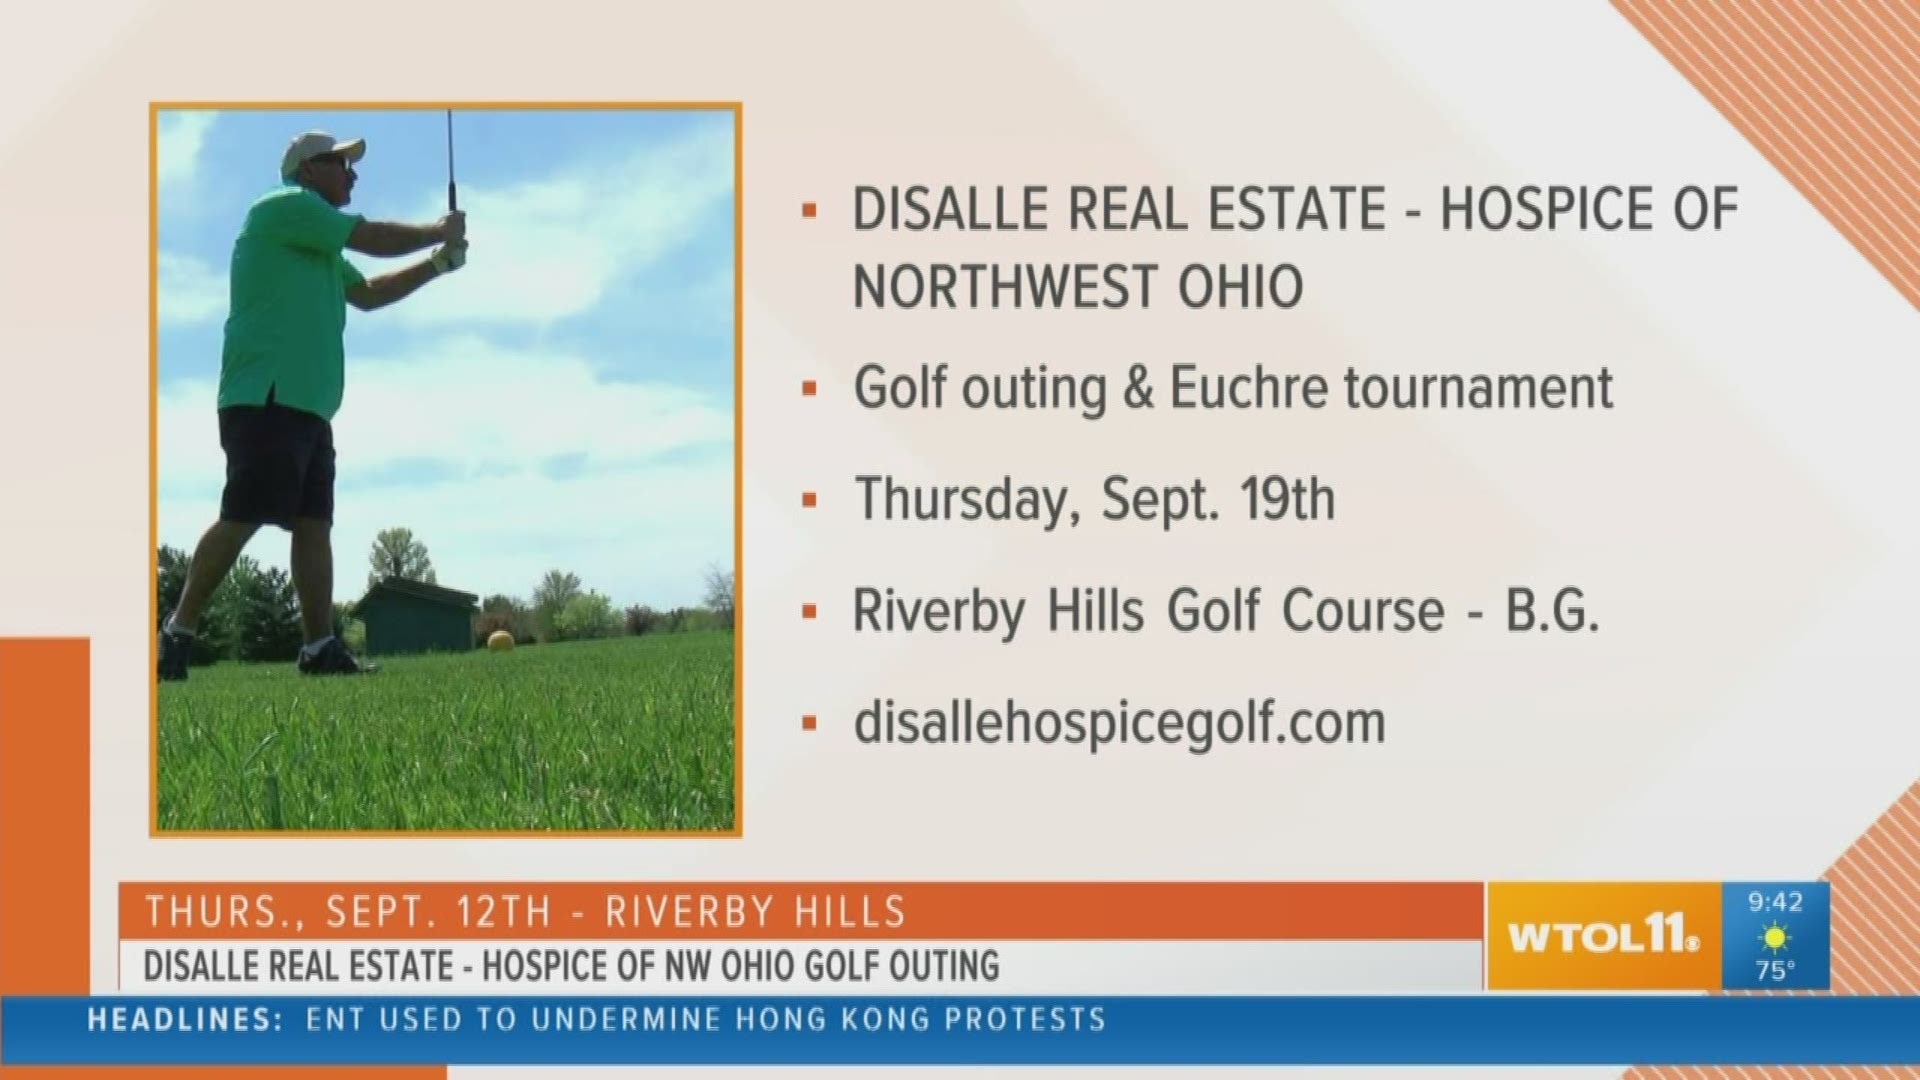 Hopsice of Northwest Ohio is celebrating 27 years of their golf outing!